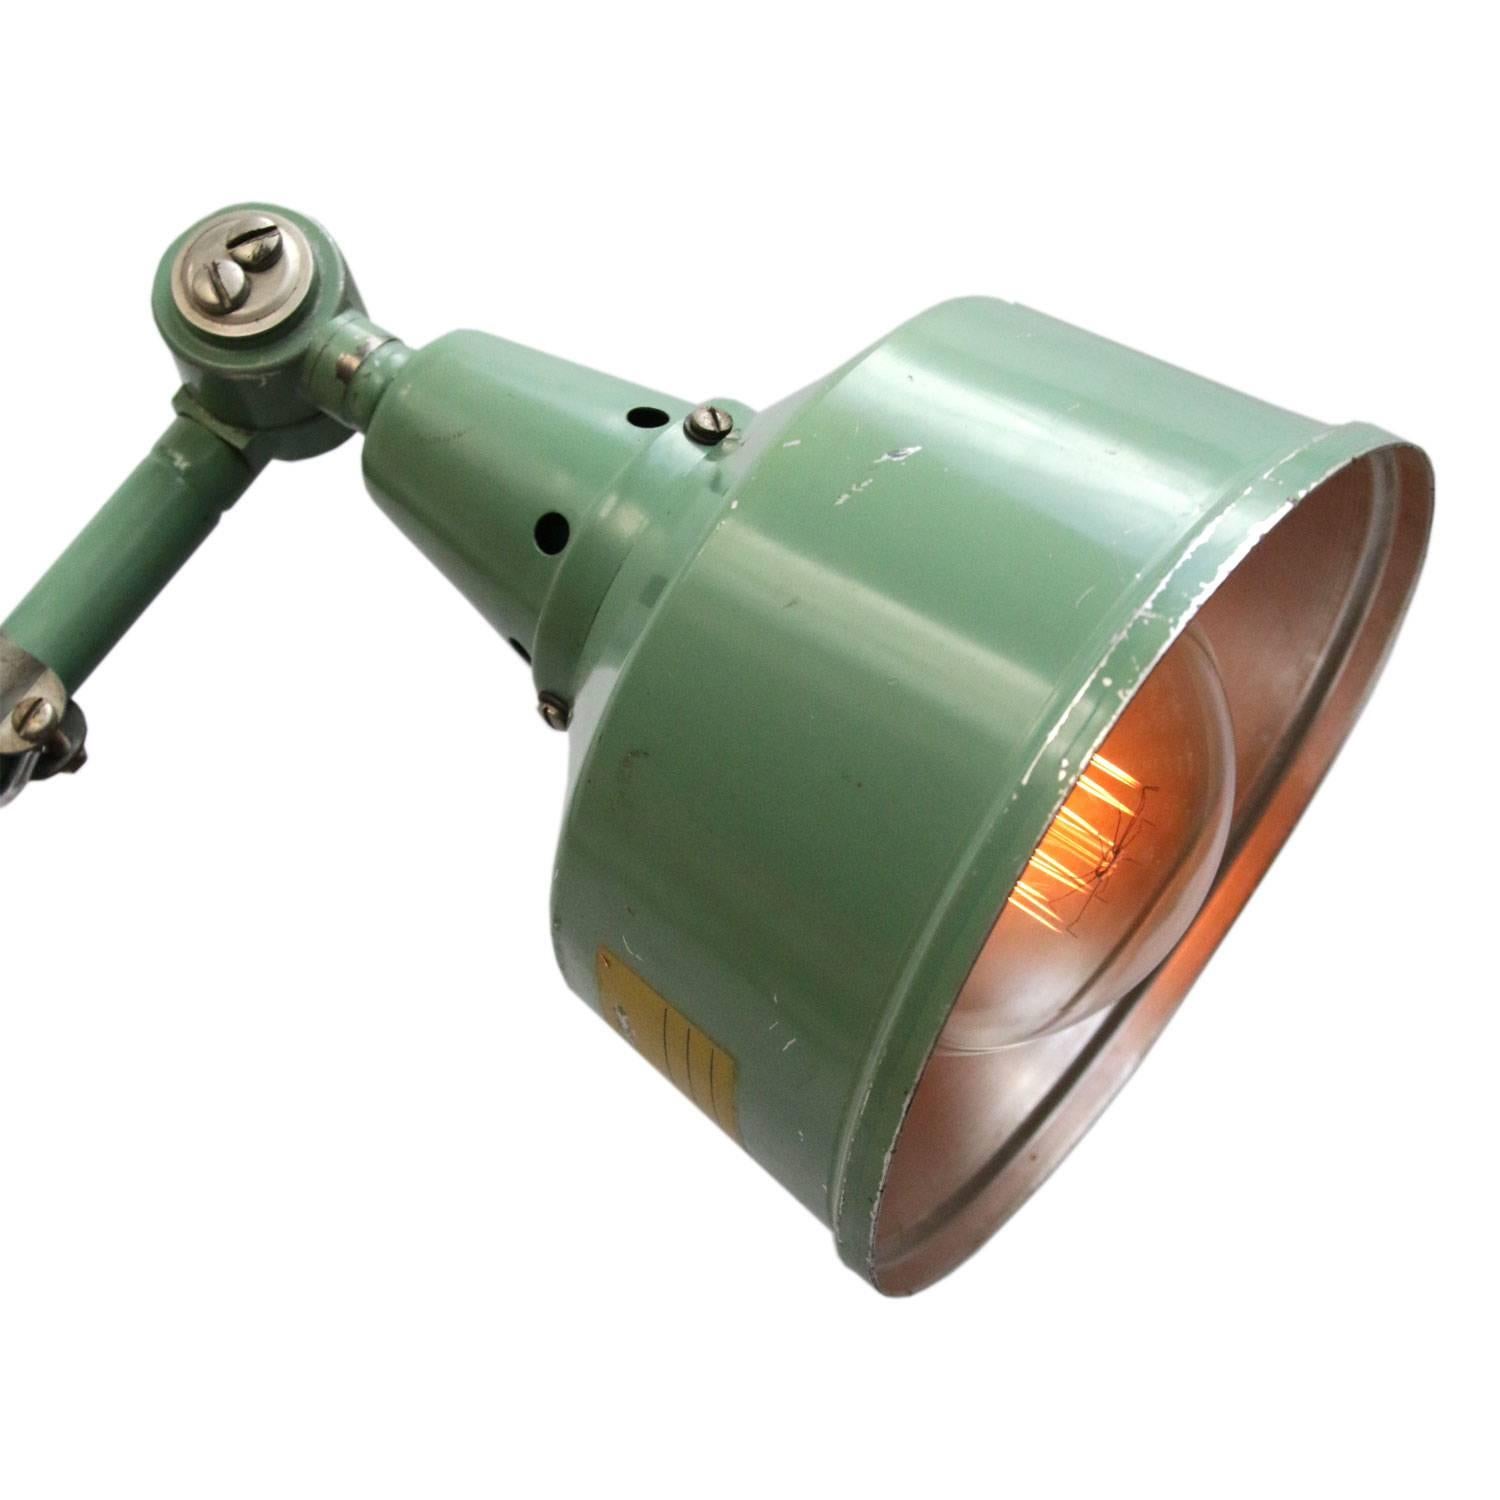 Green Industrial work light. Midgard, Germany.
Also for use on the wall

Weight: 1.3 kg / 2.9 lb

All lamps have been made suitable by international standards for incandescent light bulbs, energy-efficient and LED bulbs. E26/E27 bulb holders